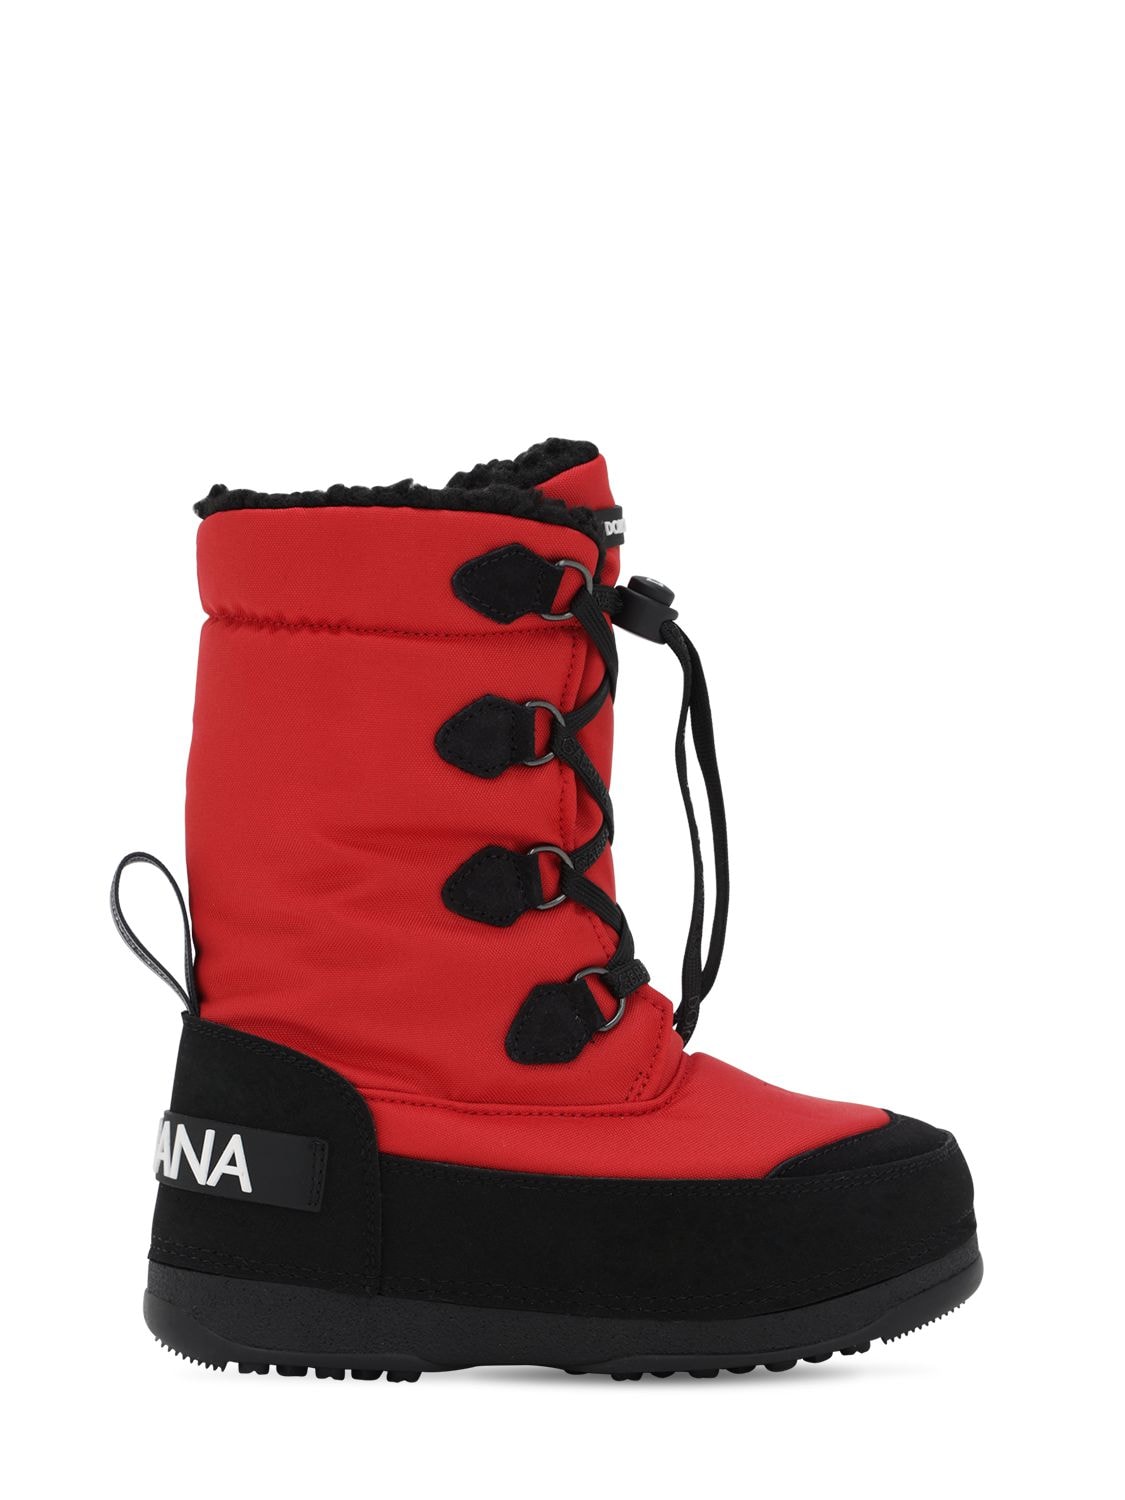 Dolce & Gabbana Kids' Nylon Water Resistant Snow Boots In Red